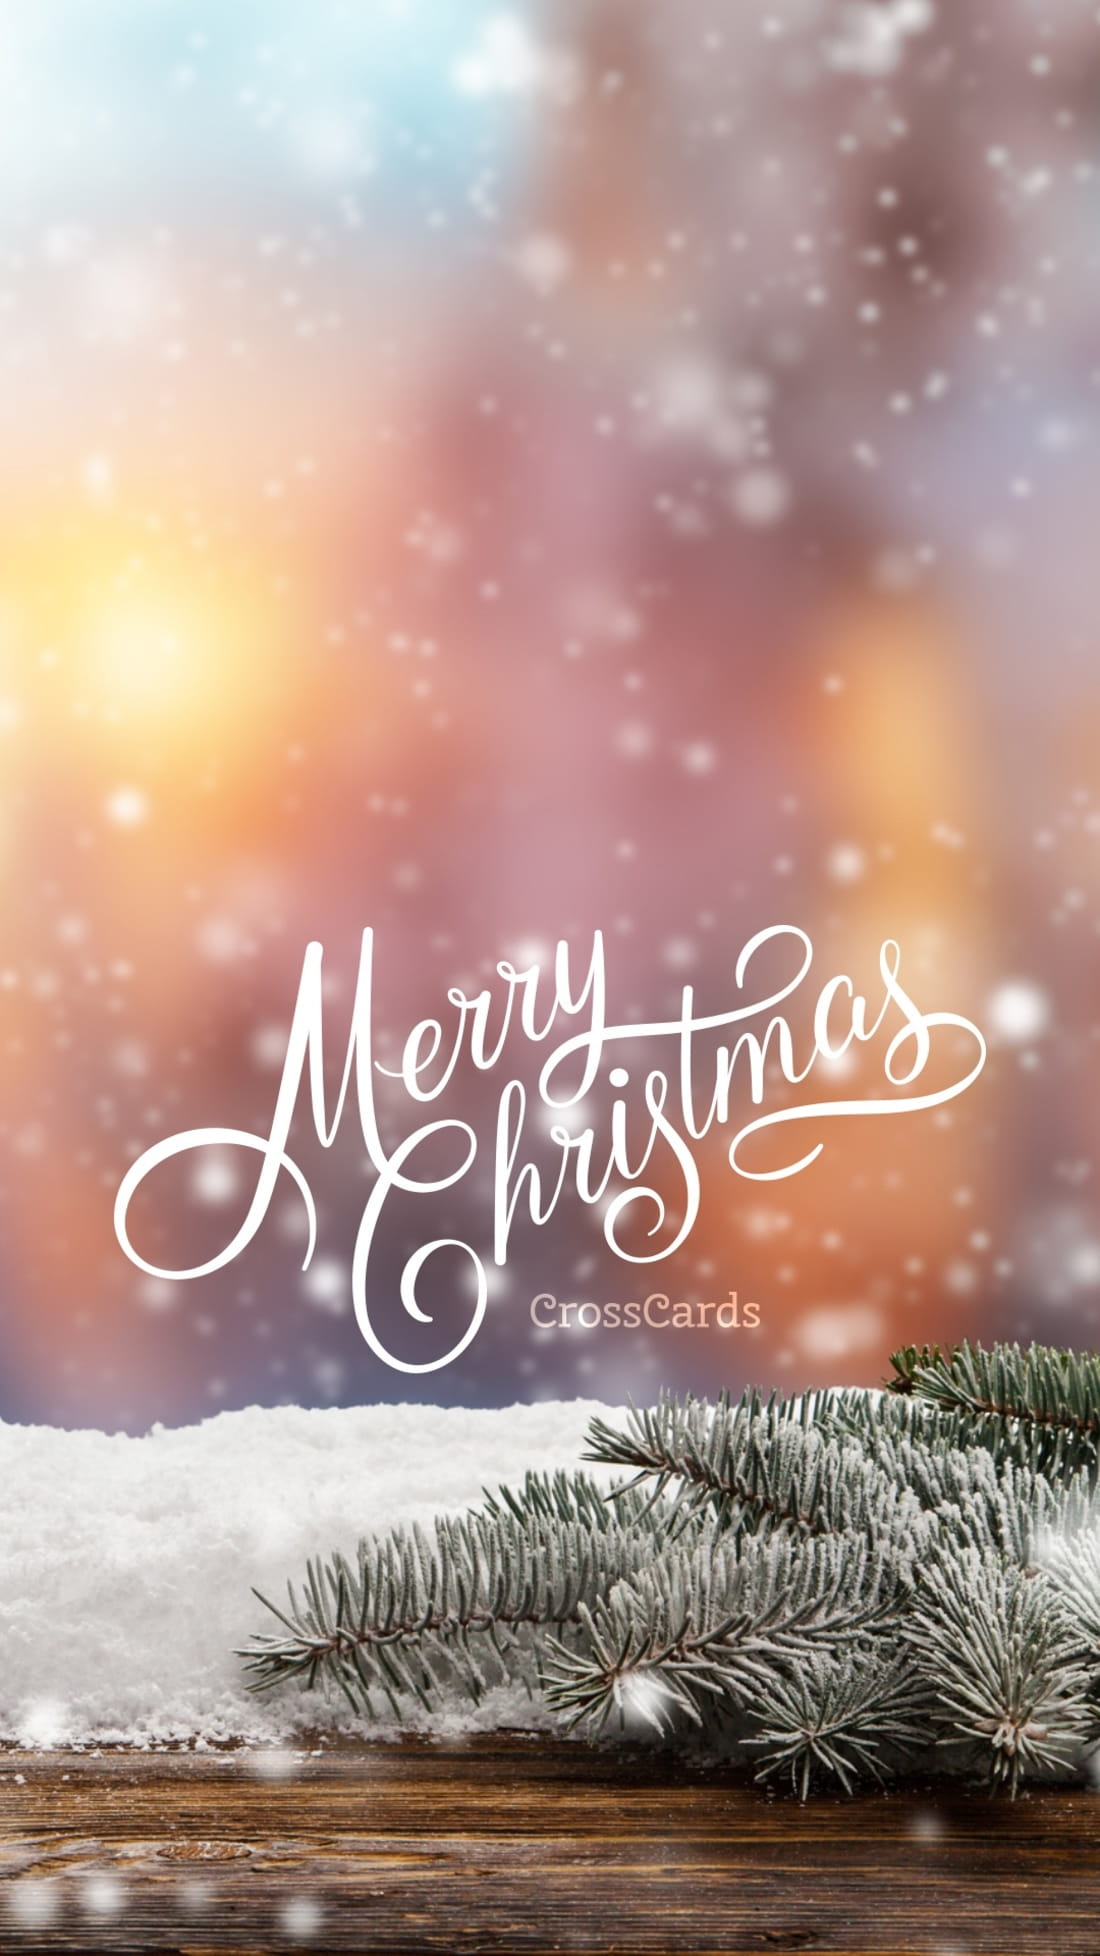 Merry Christmas to You Wallpaper and Mobile Background